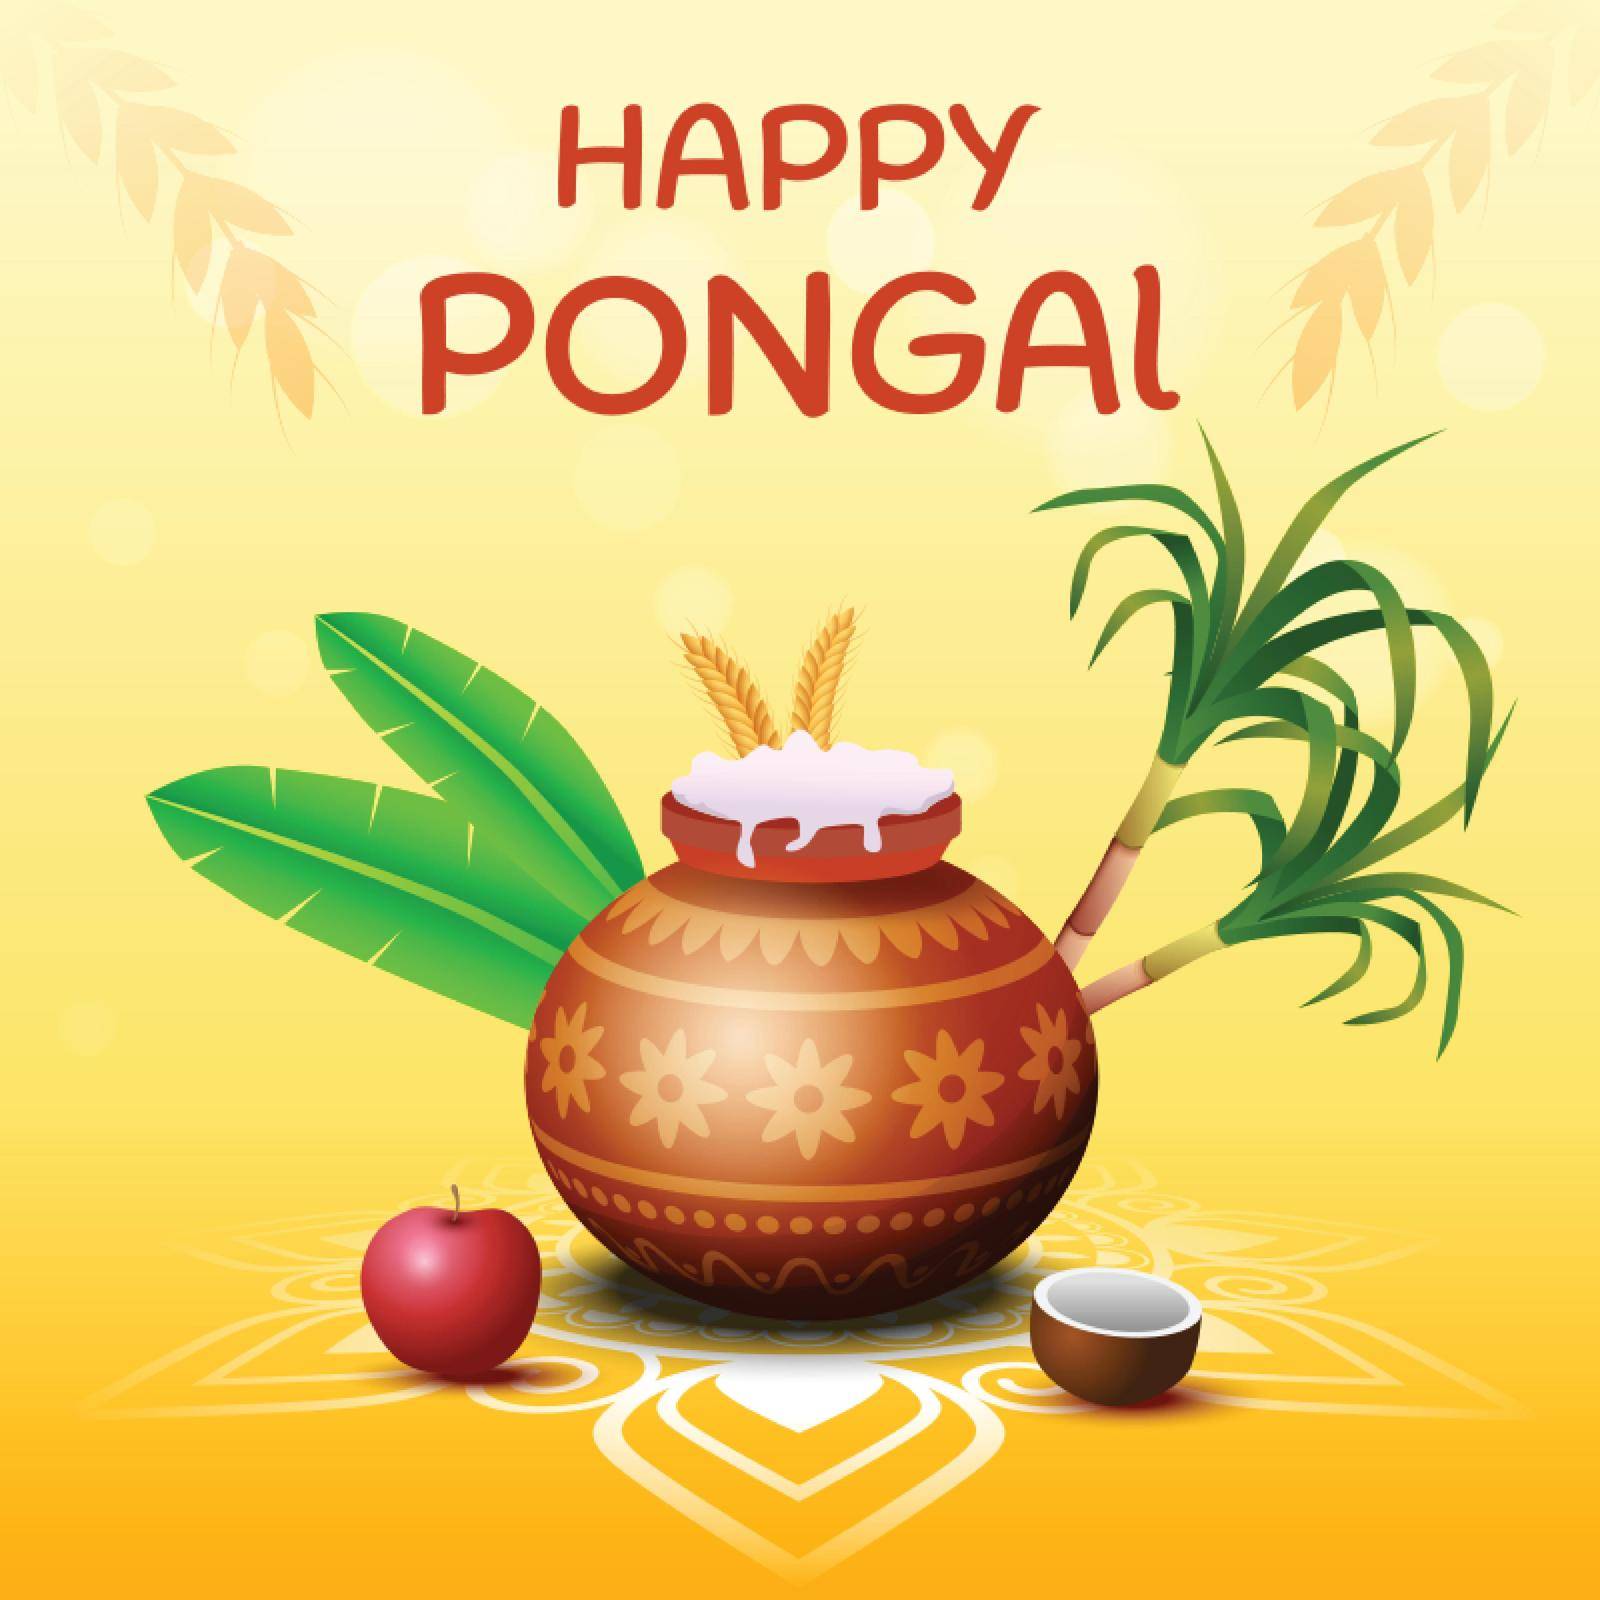 Happy pongal south indian harvesting festival greeting card vector illustration